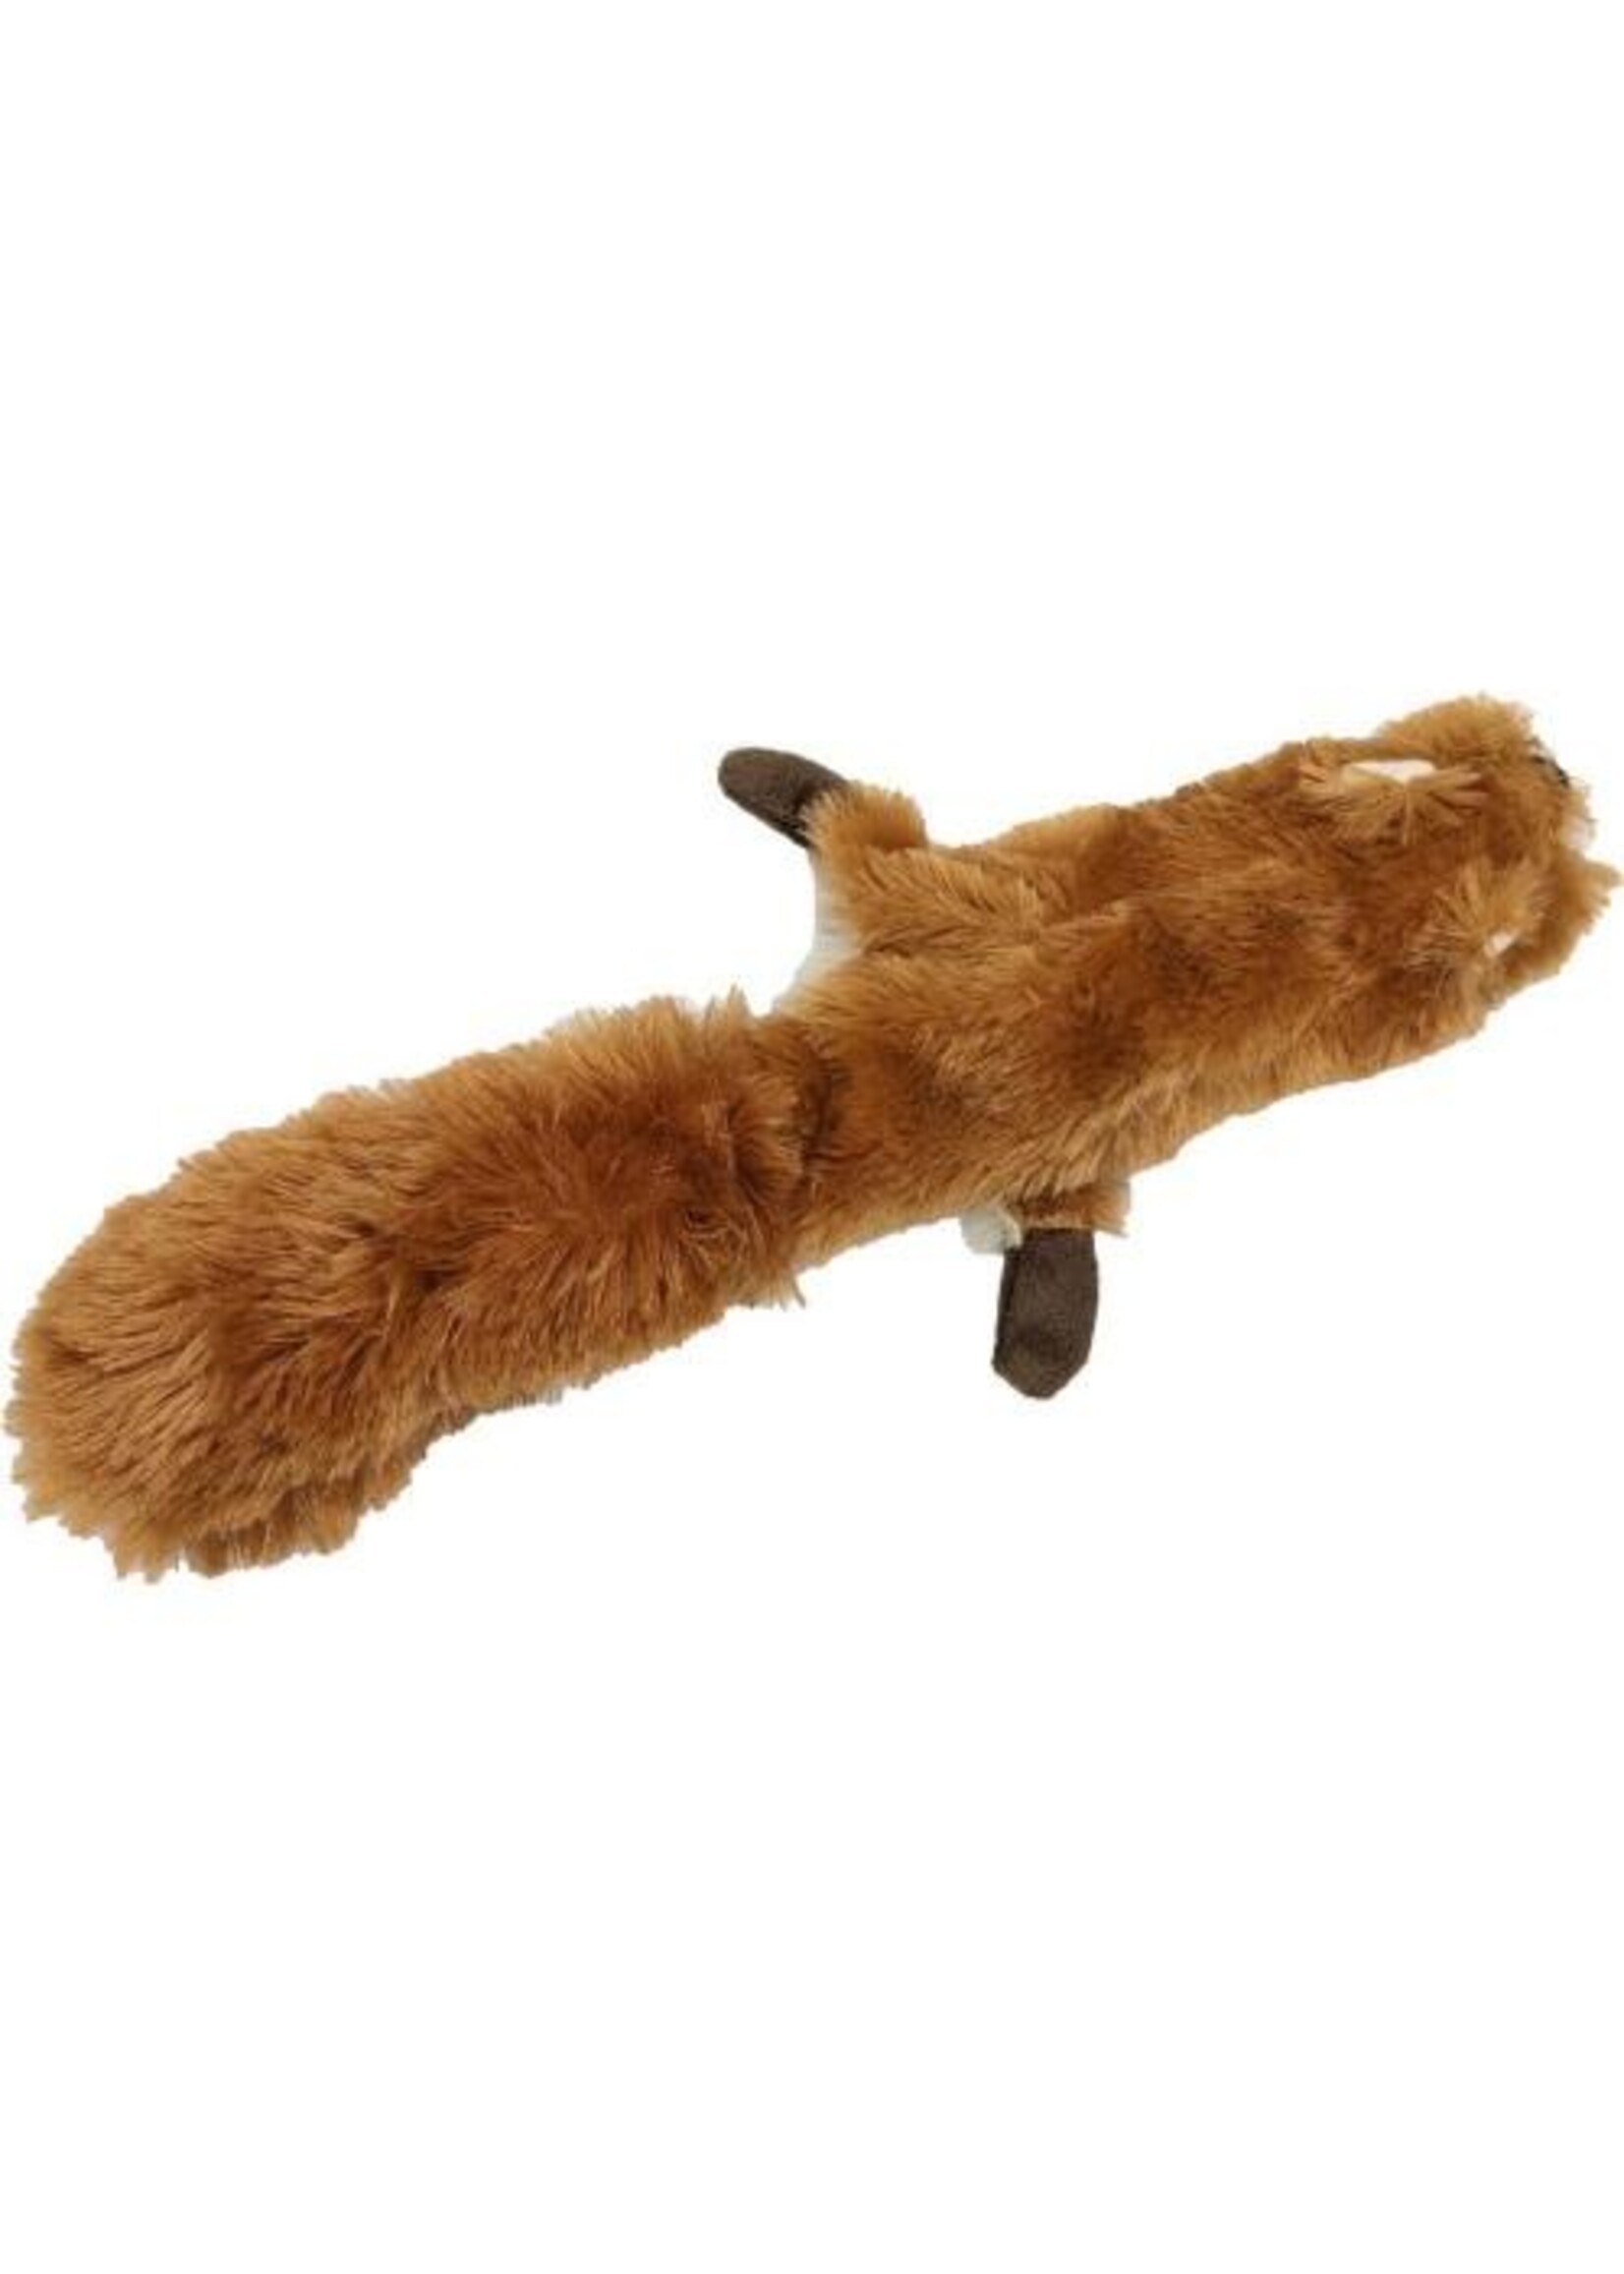 Ethical Ethical Flippin' Skinneeez Squirrel 15"